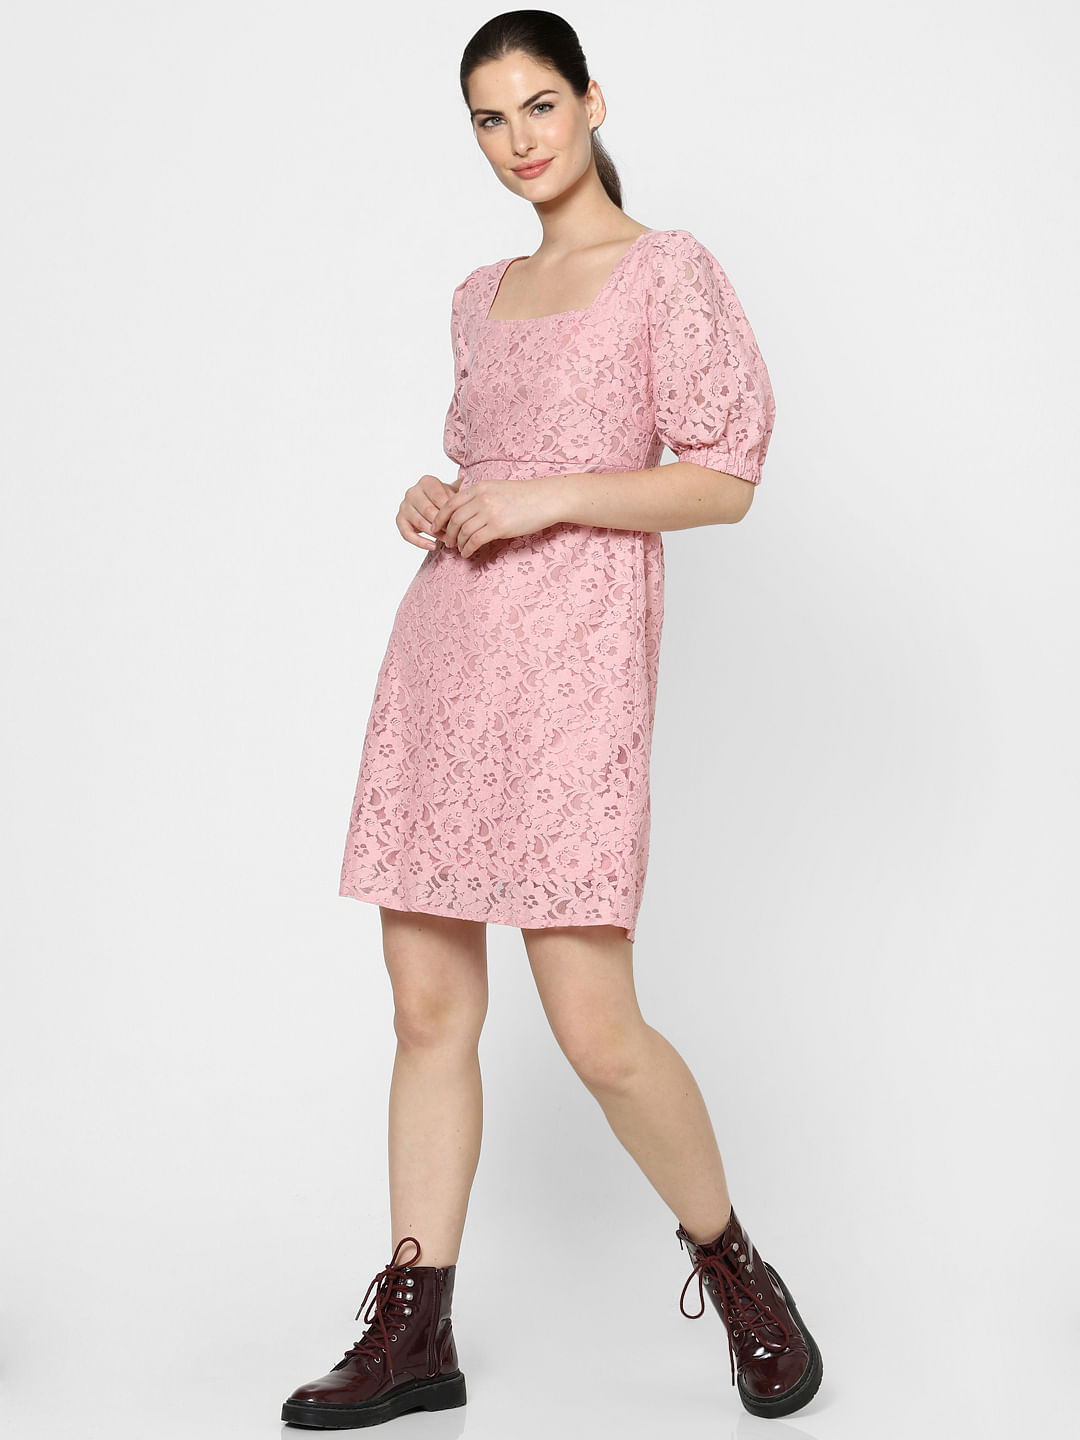 Women's Pink Fit And Flare Dress Long Sleeve Square Neck | Ally Fashion